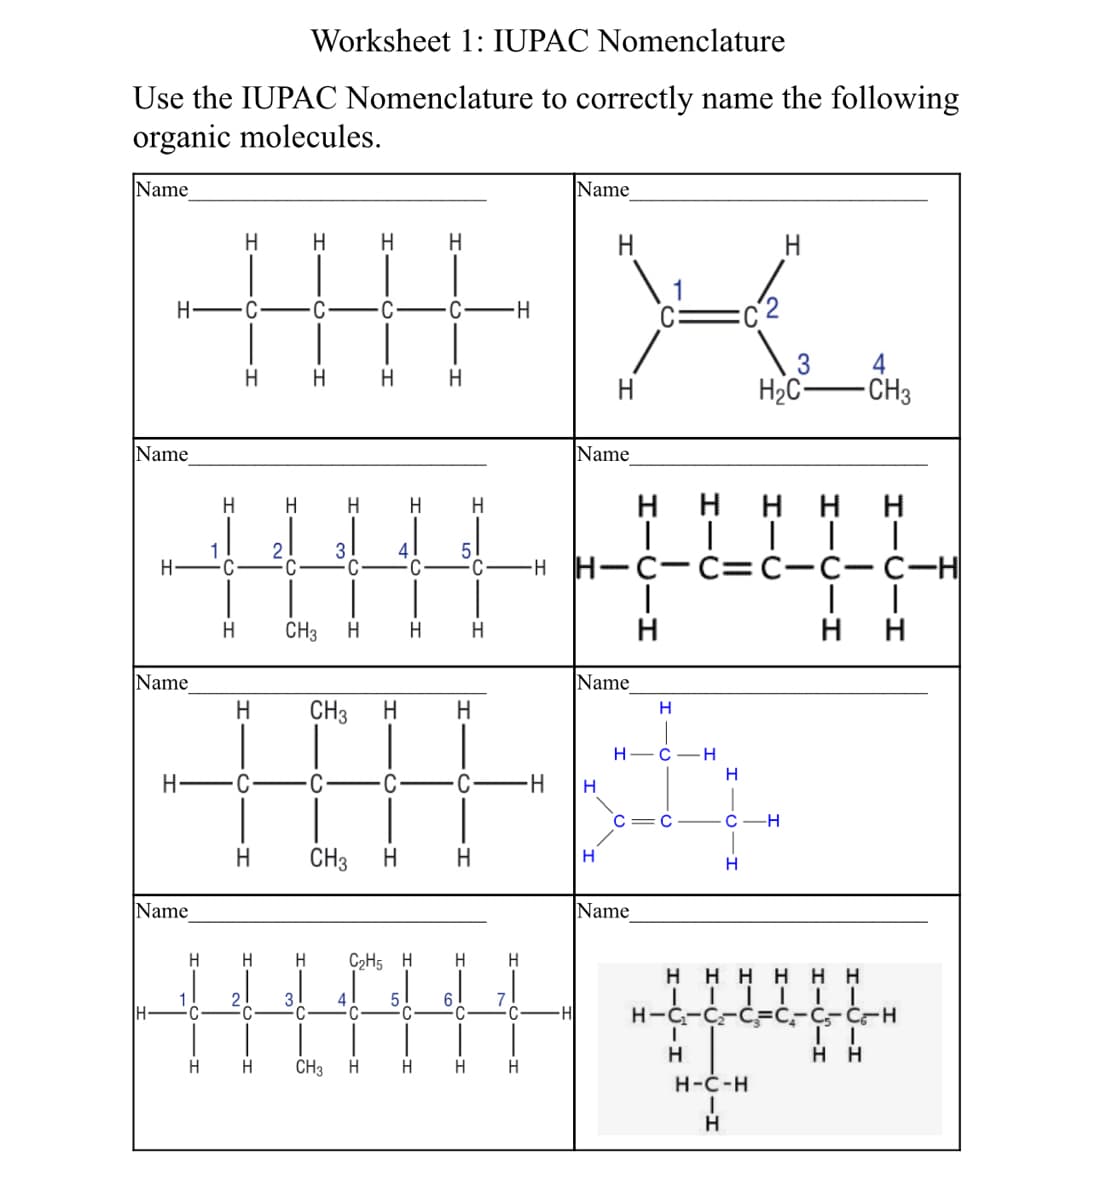 Worksheet 1: IUPAC Nomenclature
Use the IUPAC Nomenclature to correctly name the following
organic molecules.
Name
Name
H
H
H
H
H
H FC
C
C
4
H2C-
-CH3
H
H.
H.
H
Name
Name
ннн нн
H
H
H
1
C
21
3
4
C
C
-H H-C C=C-C-C--H
CH3
H
H
нн
Name
Name
H
CH3
H.
H
Н—С — Н
H
H
H-
с —Н
CH3
H.
H.
H
H
Name
Name
C2H5 H
H
H
нннн нн
1
2
3
4
6.
H-
-H
H-C-C-CFC,-C-C-H
H
H
H
CH3
H.
H
H
H
Н-С-н
H.
